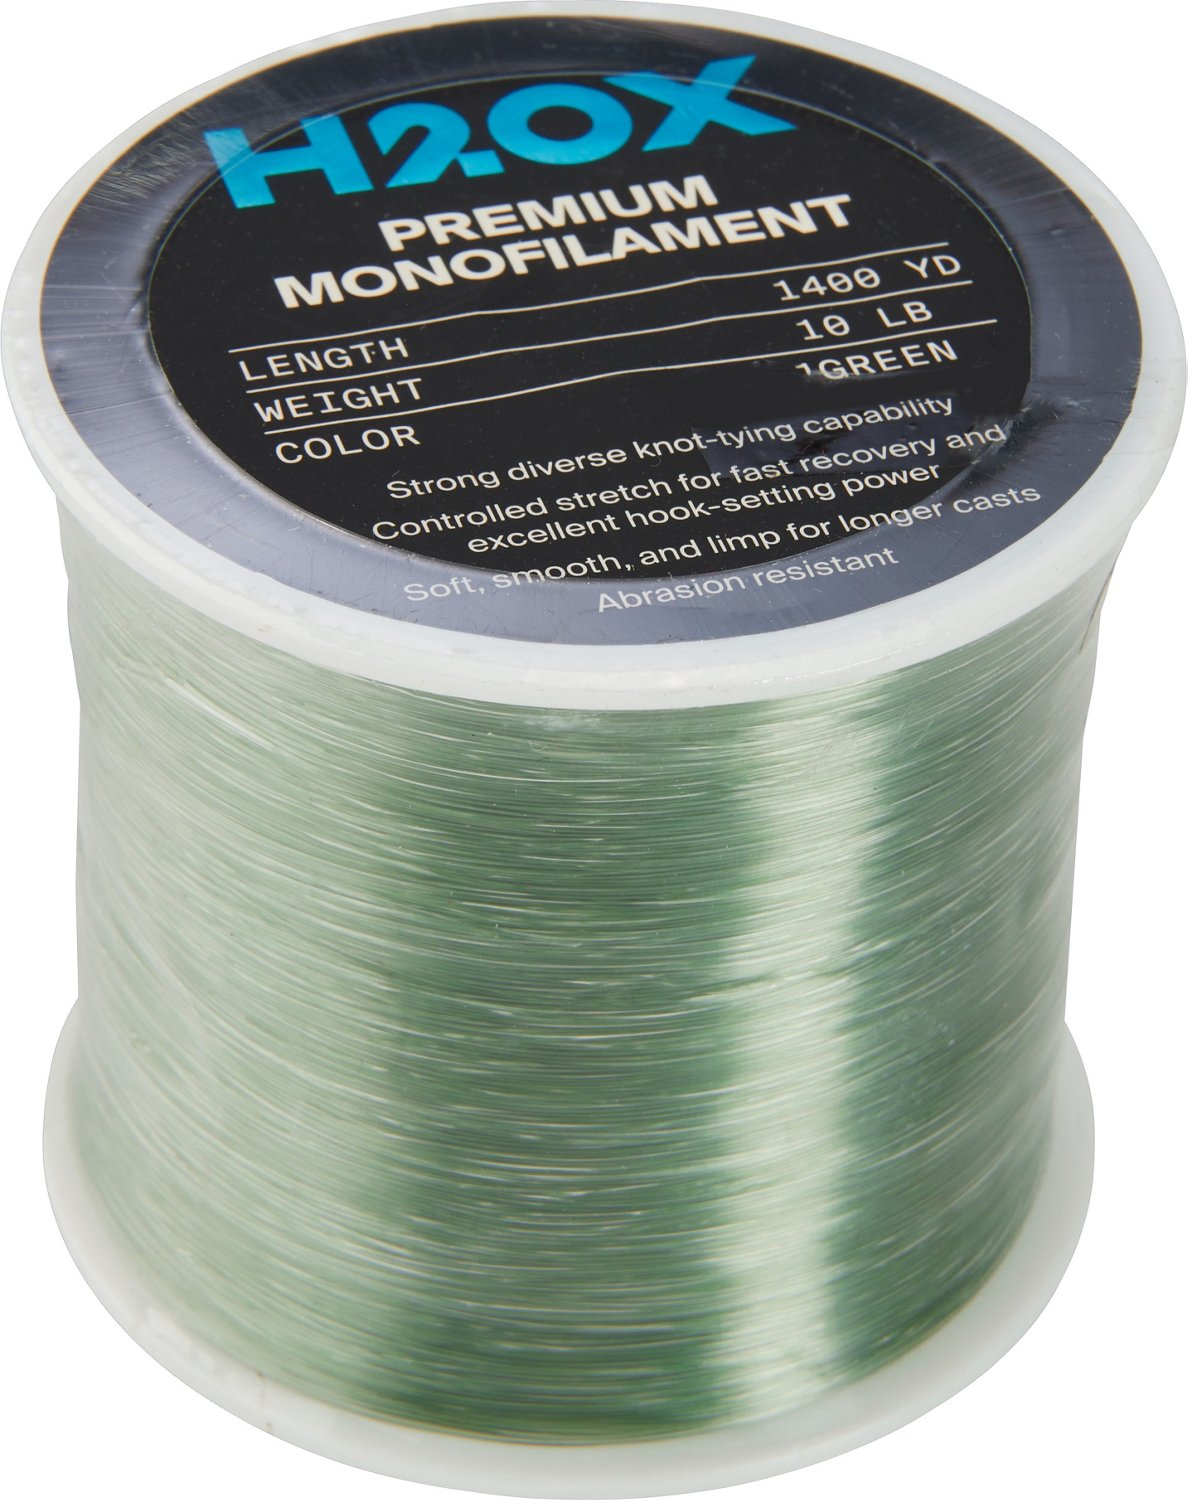 Academy Sports + Outdoors Sunline Super Natural 20 lb - 330 yd Nylon  Fishing Line